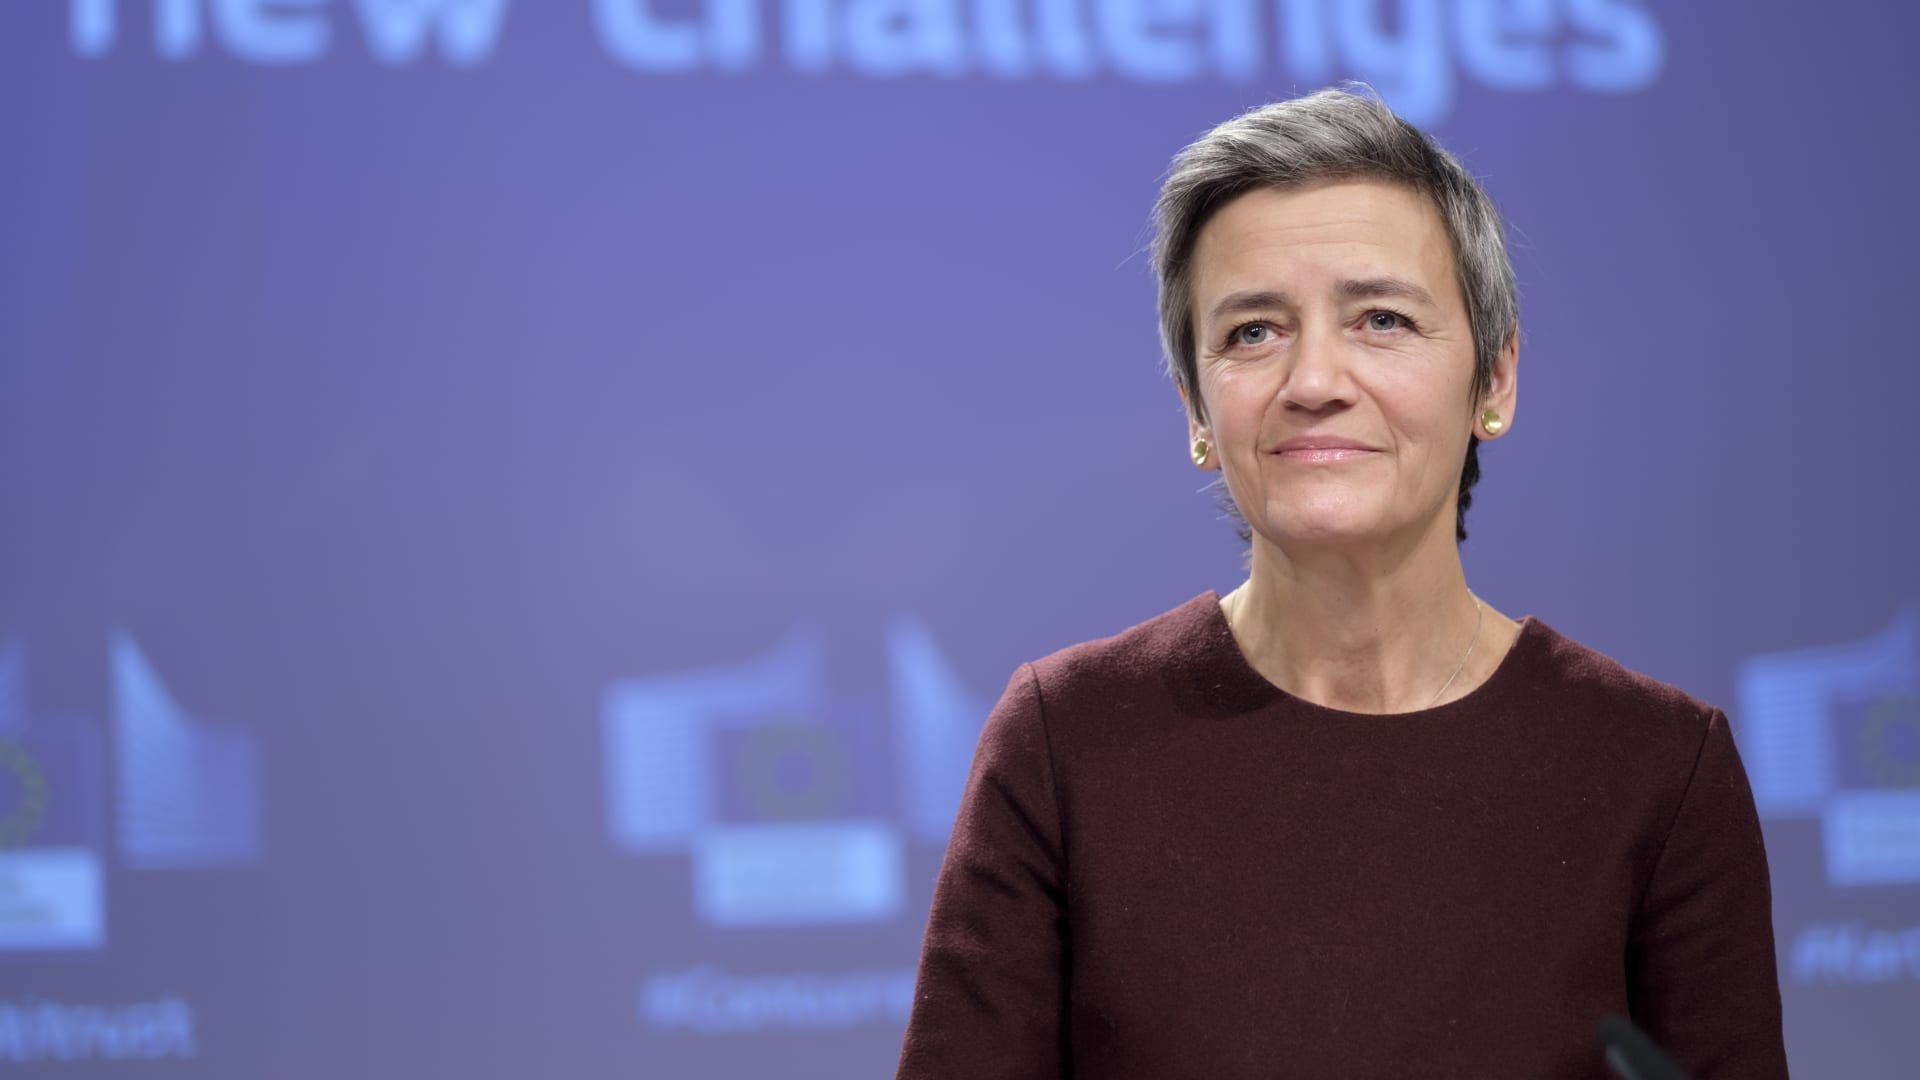 EU targets big tech companies with sweeping new antitrust rules